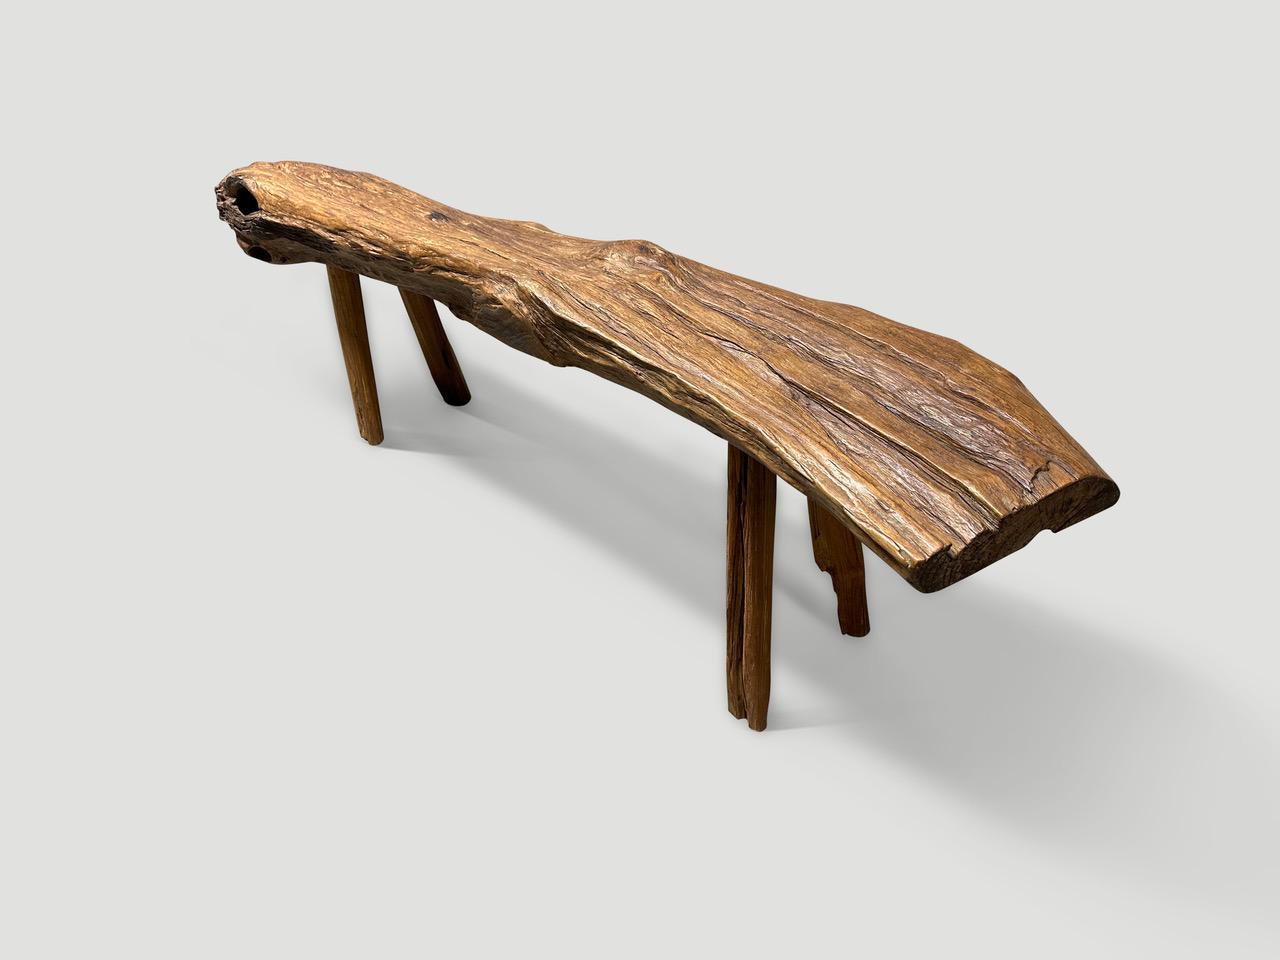 Andrianna Shamaris Antique Wabi Sabi Teak Wood Bench  In Excellent Condition For Sale In New York, NY